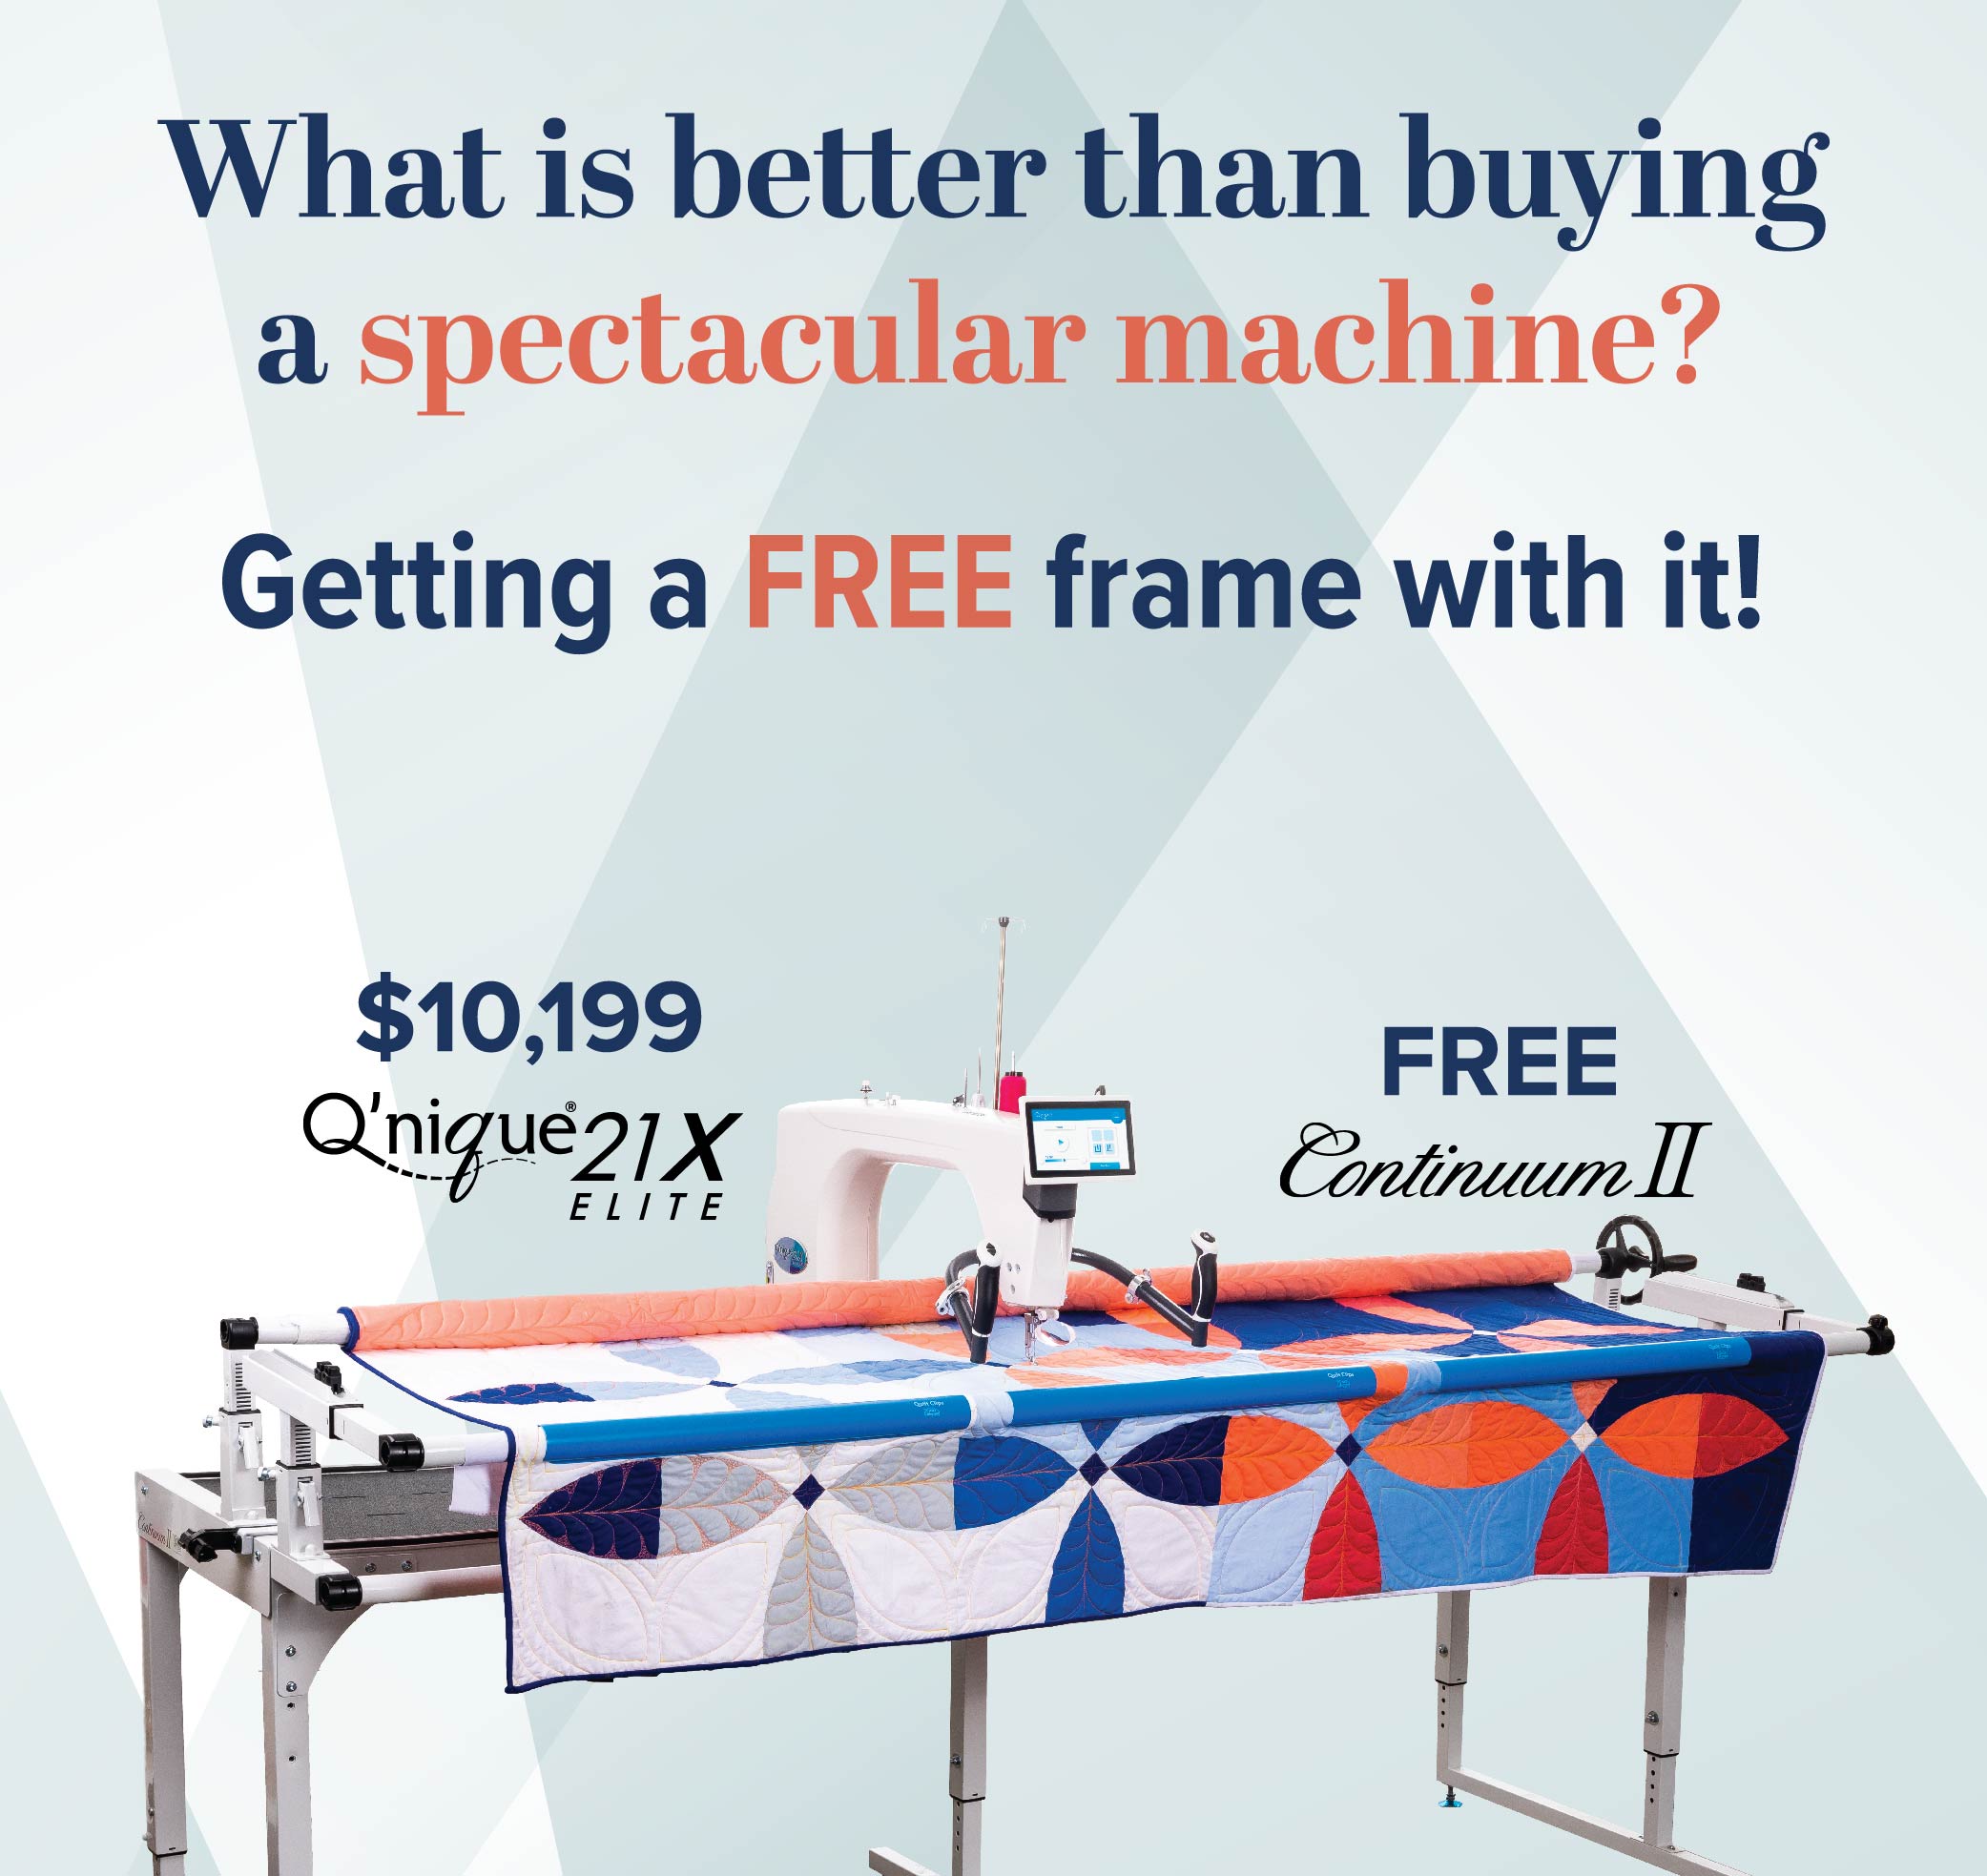 What is better than buying a spectacular machine? Getting a FREE frame with it.